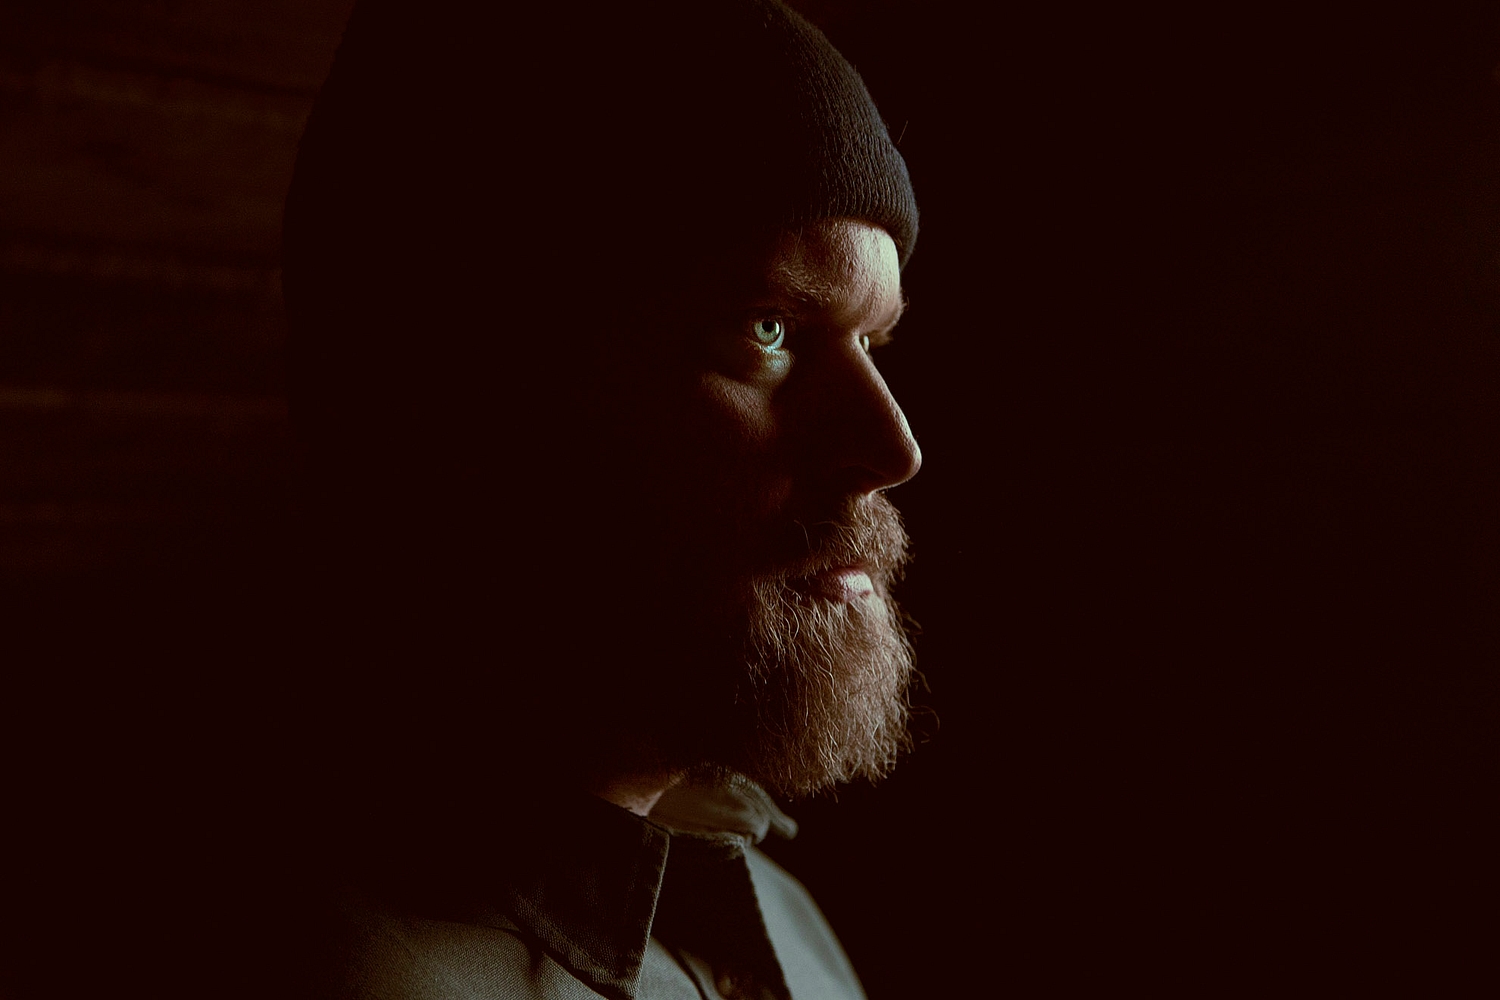 John Grant shares new song ‘Disappointing’